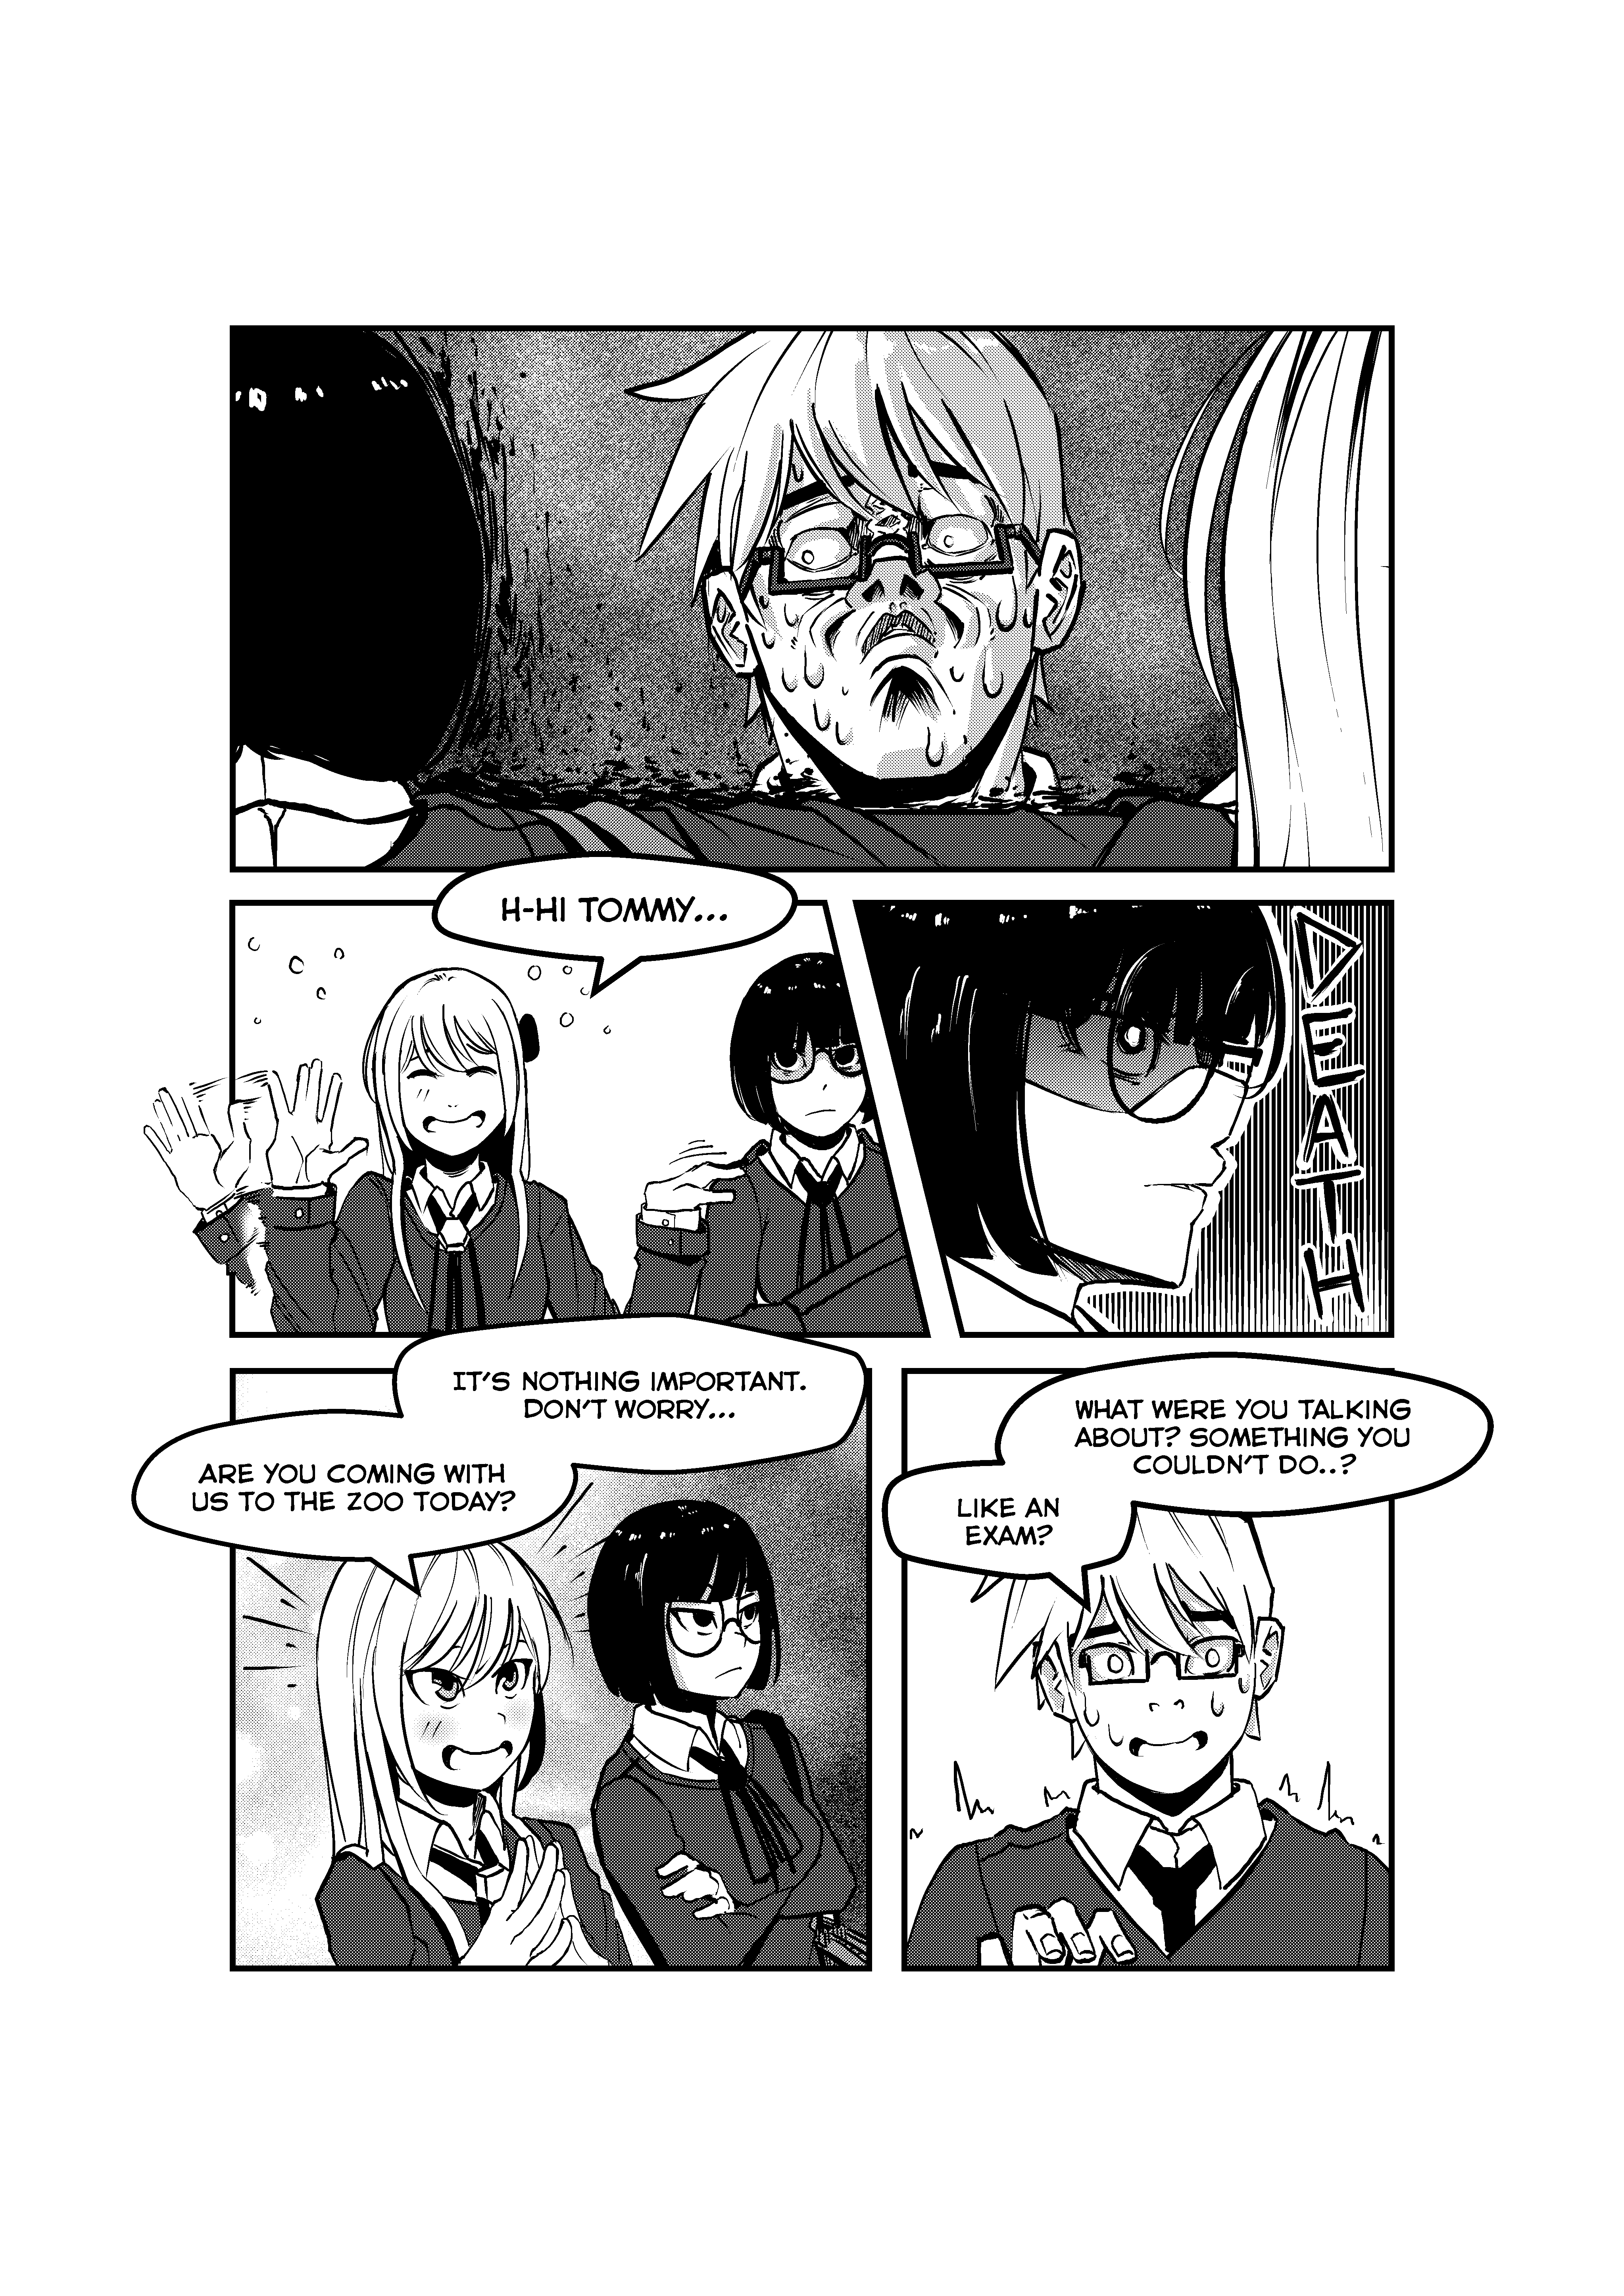 Opposites In Disguise - 20 page 7-ce8ba71d